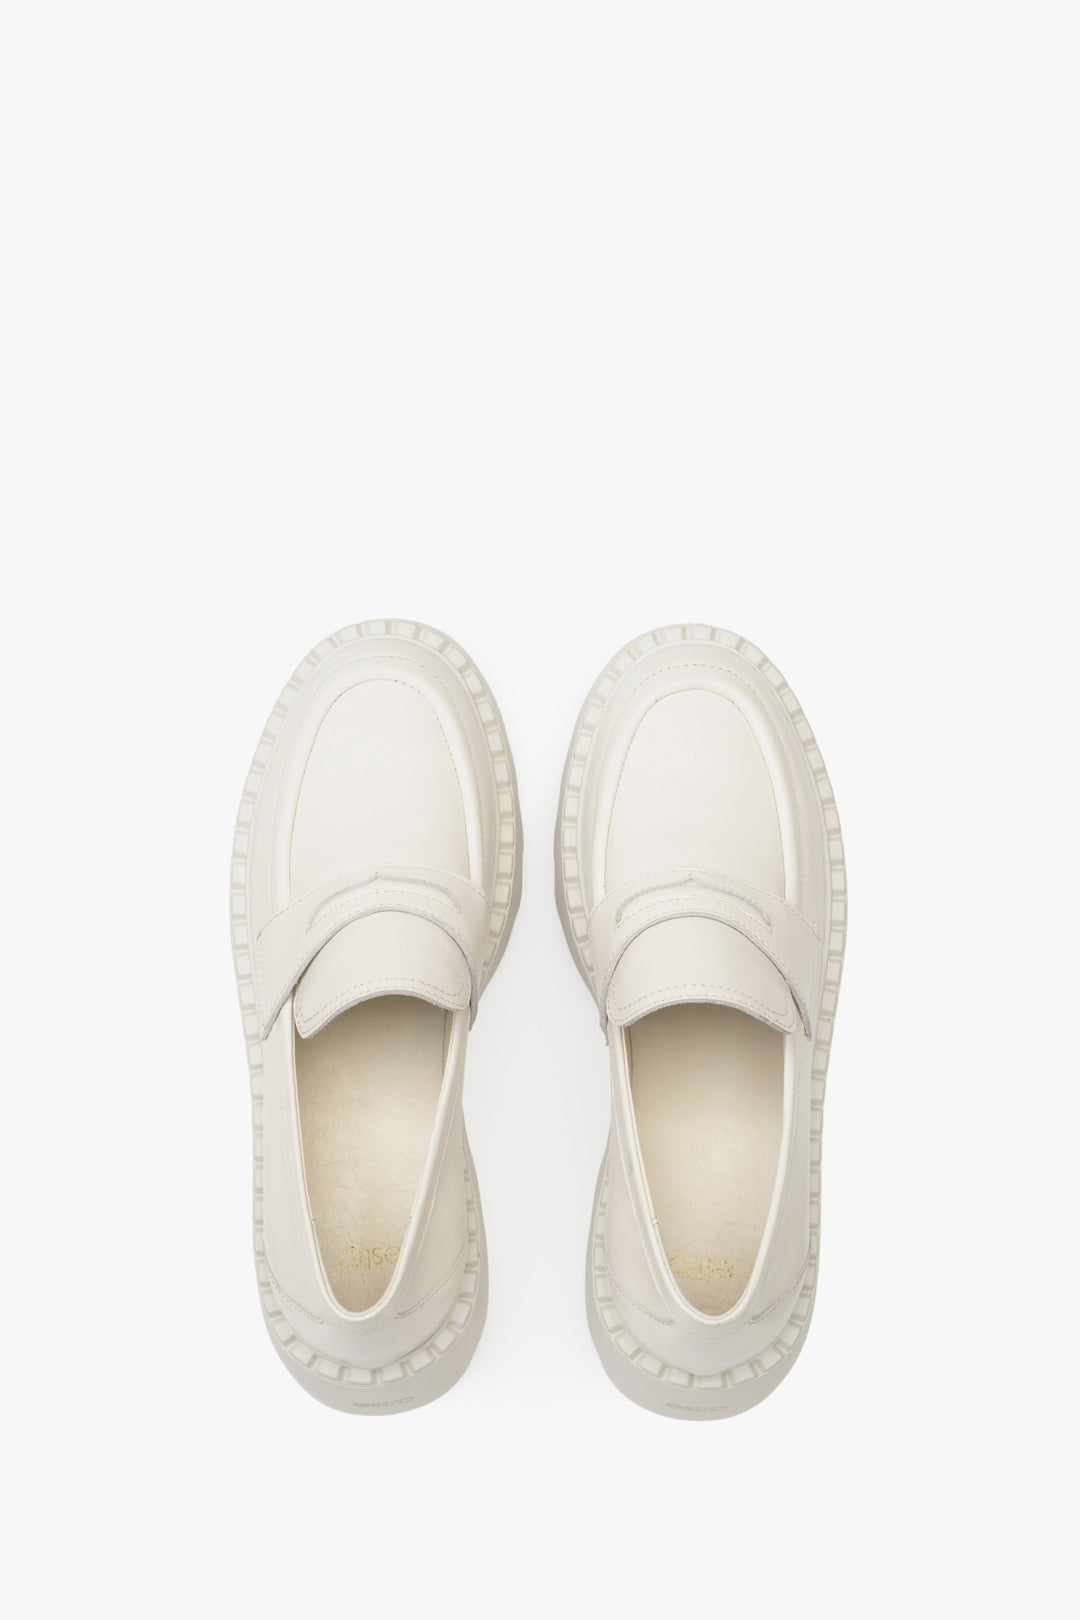 Elegant leather loafers in light beige - presentation of the footwear from above.